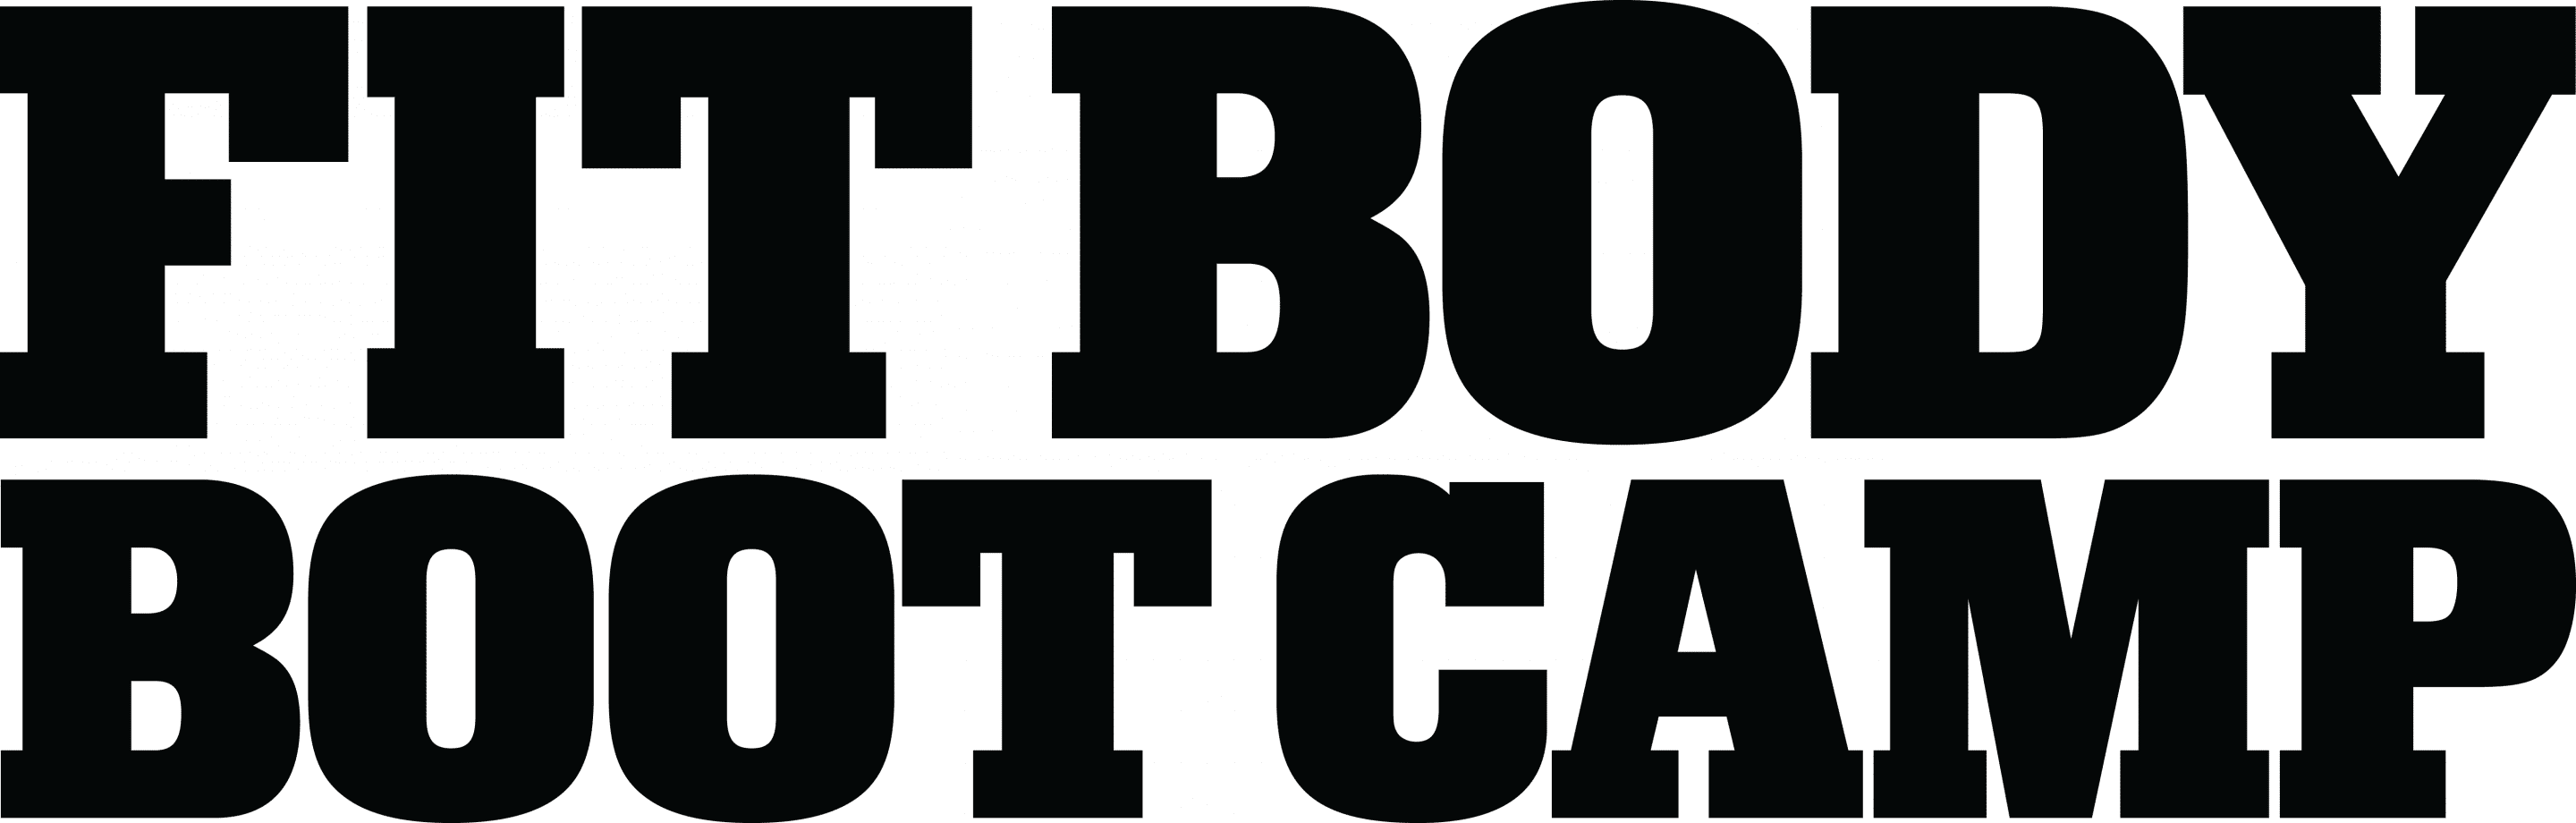 The Fit Body Bootcamp logo